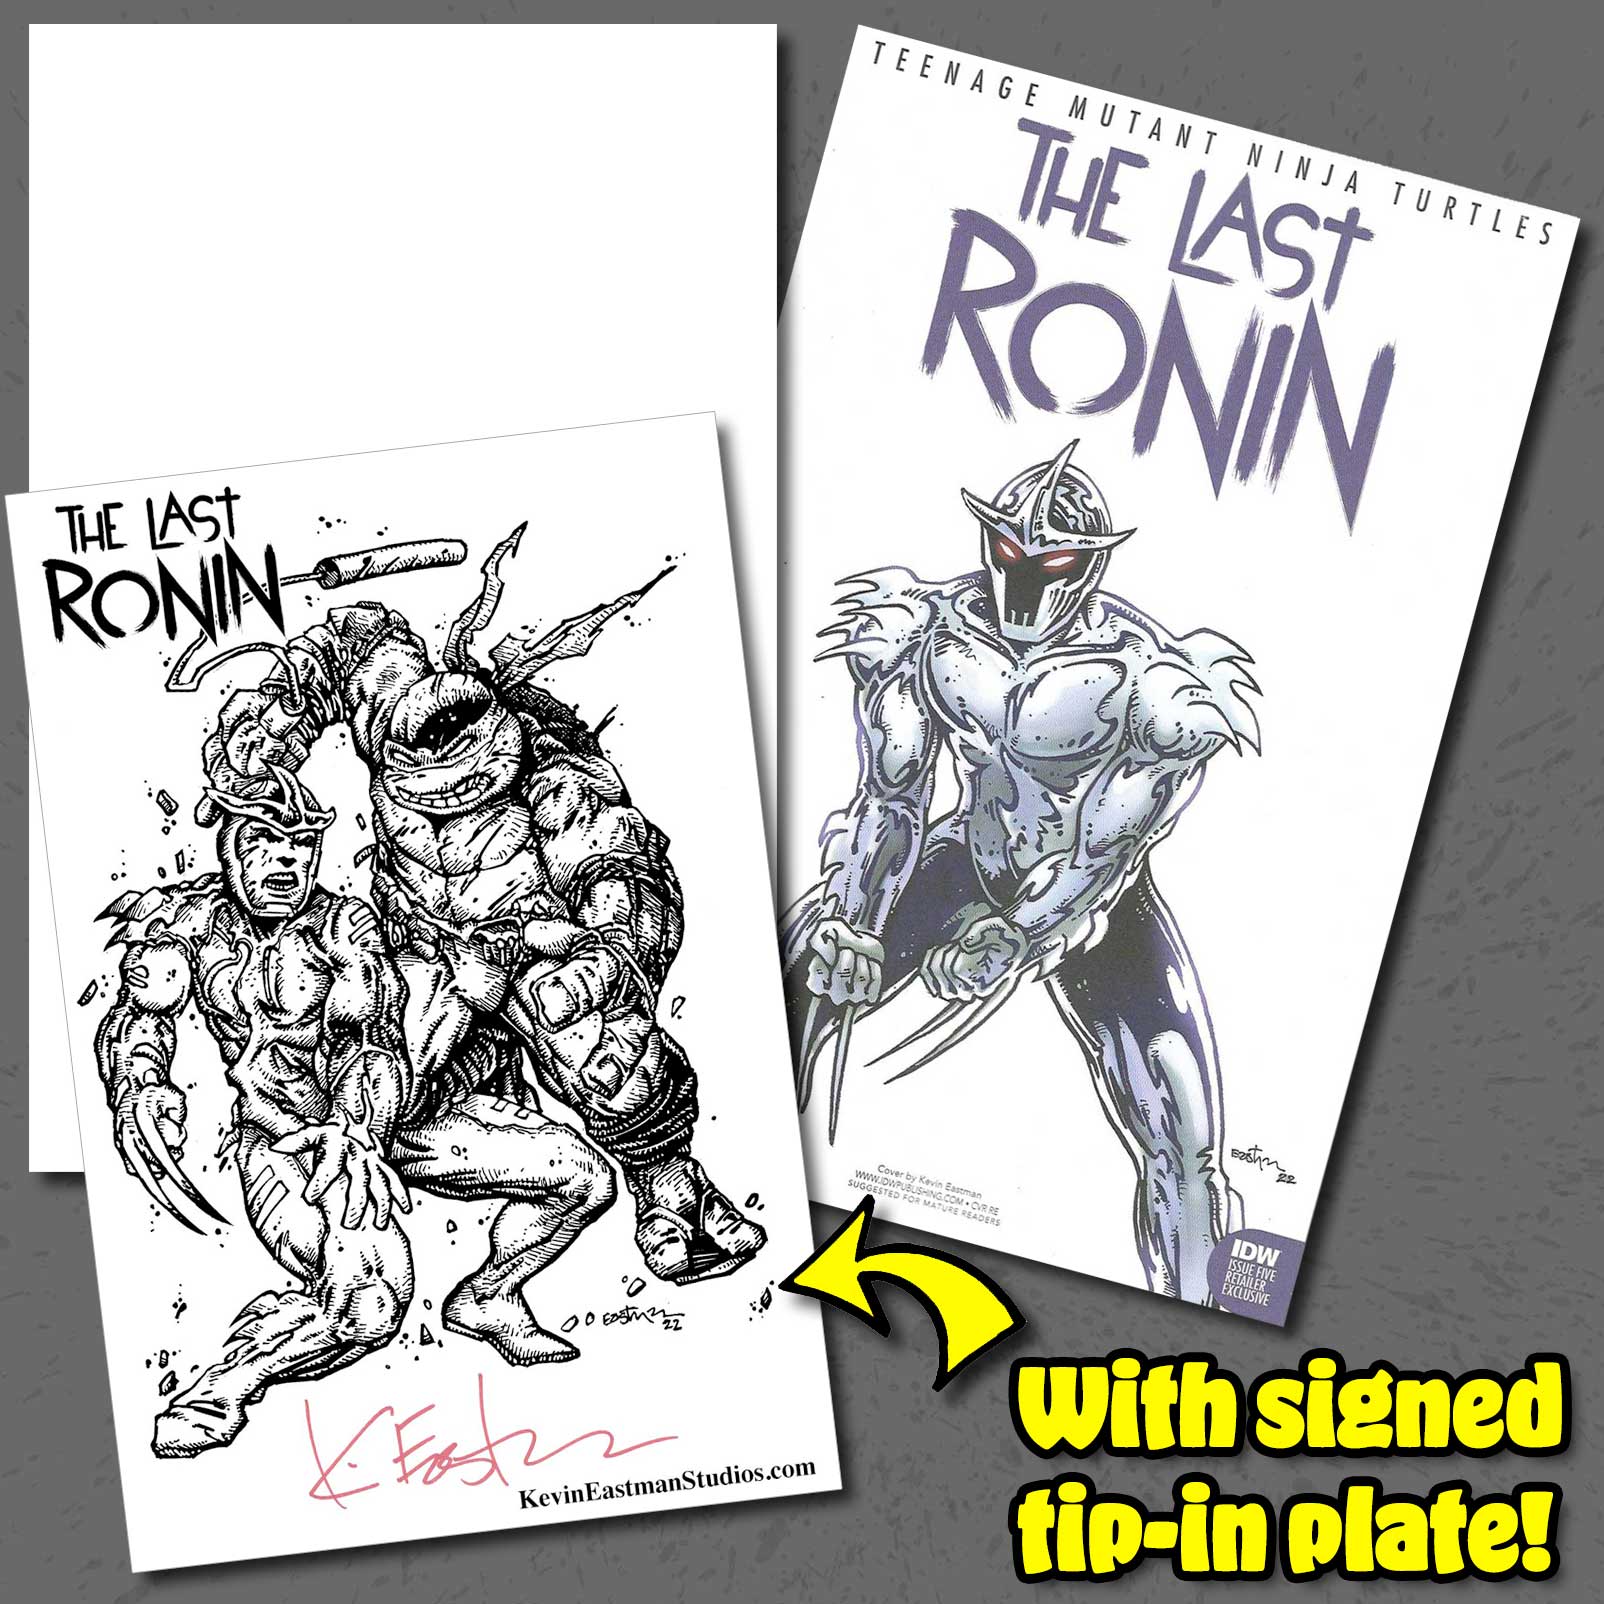 The Last Ronin Collected Sets and Book 5 Variants